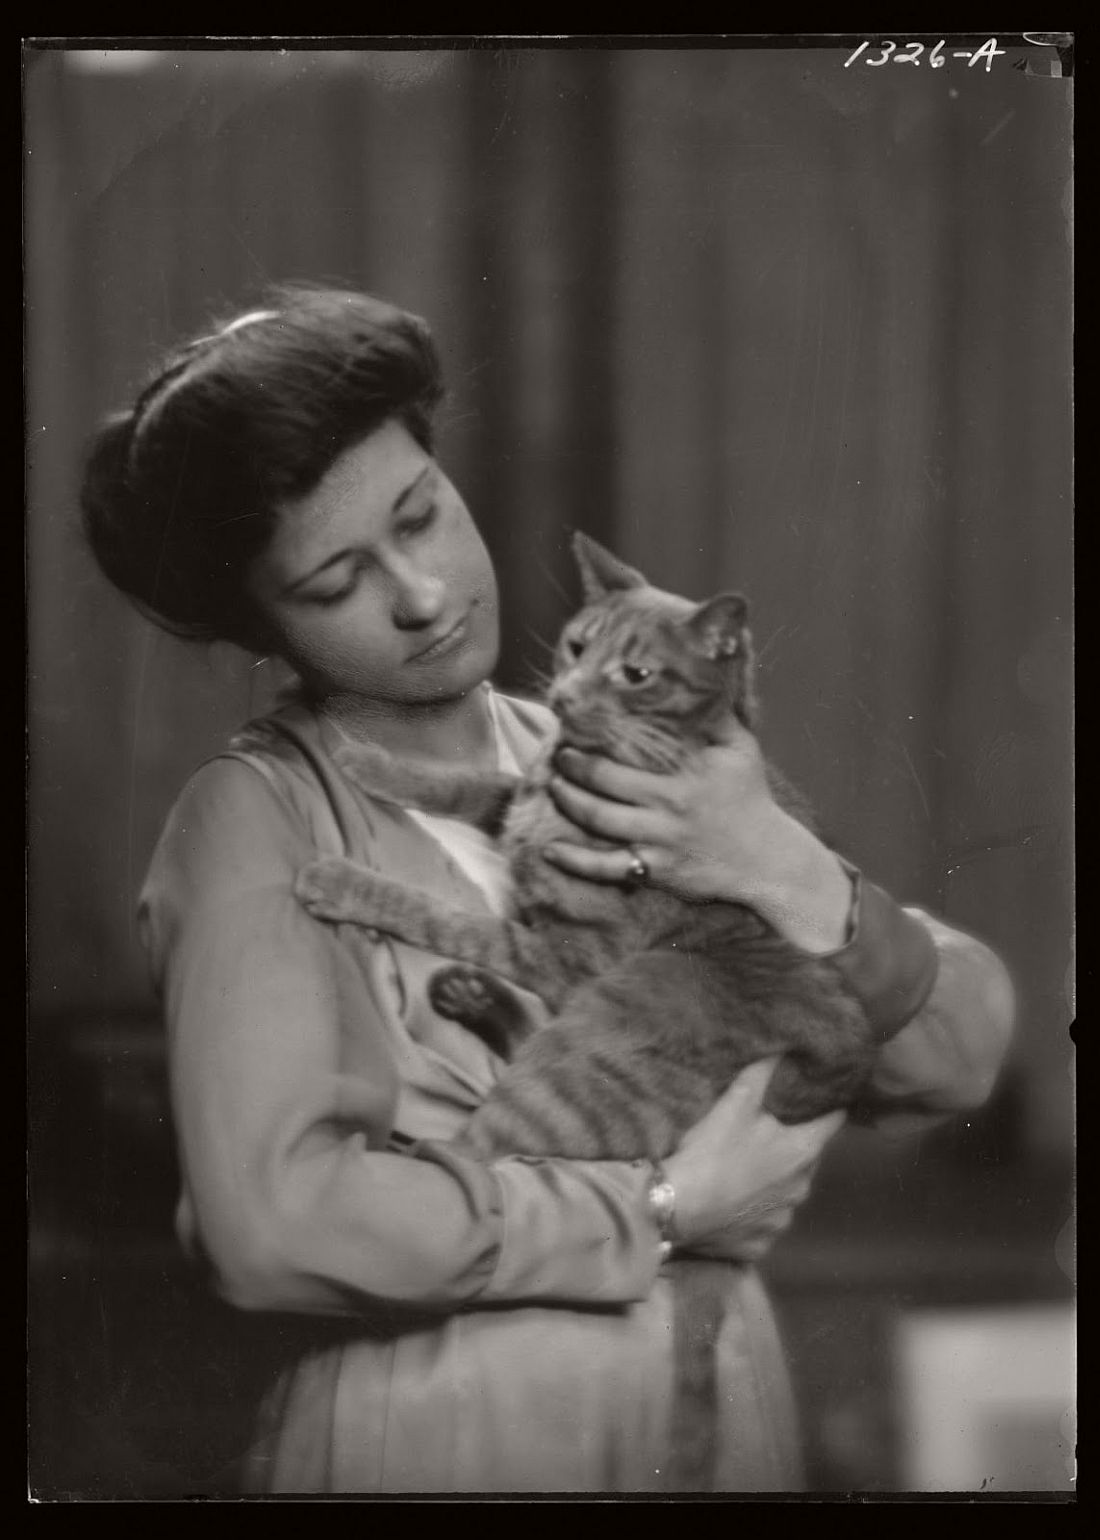 Vintage: Studio Portraits of Girls with Cat by Arnold 